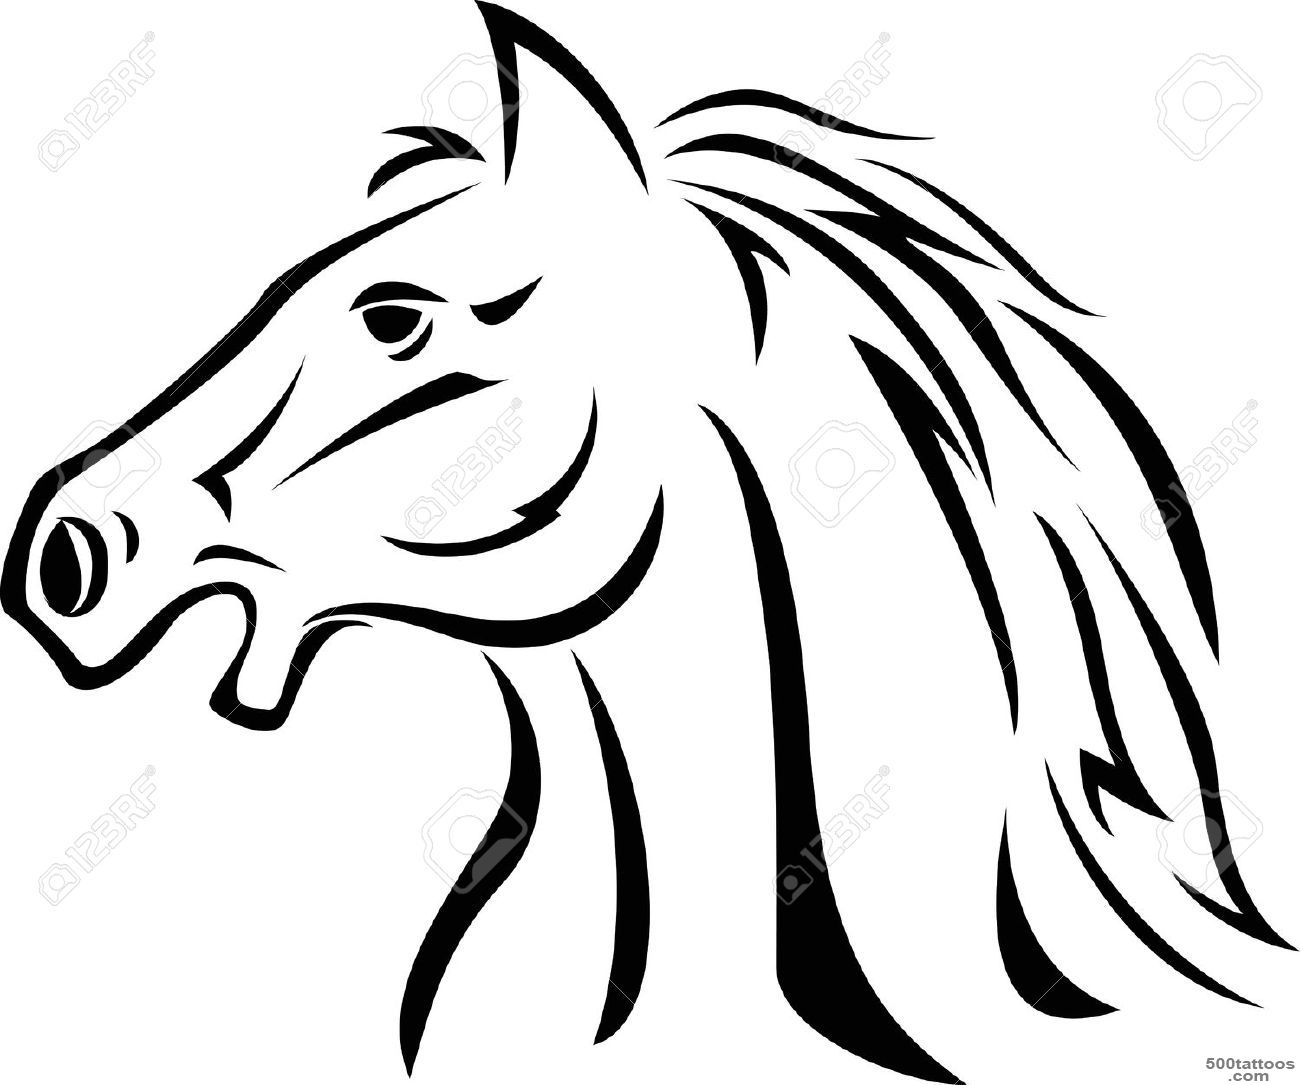 Horse Tattoo Royalty Free Cliparts, Vectors, And Stock ..._49